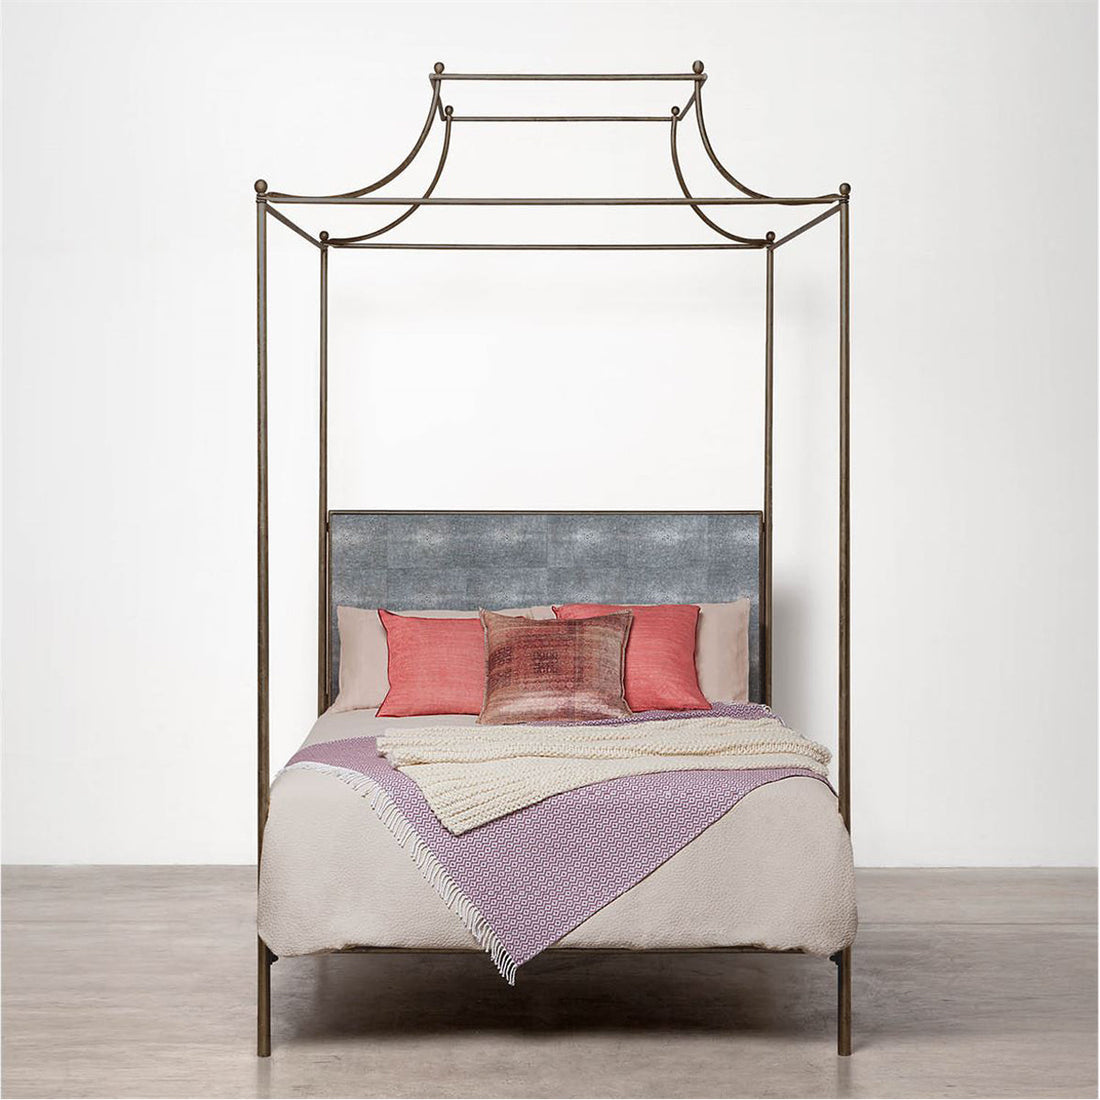 Made Goods Janelle Scalloped Iron Canopy Bed in Nile Fabric